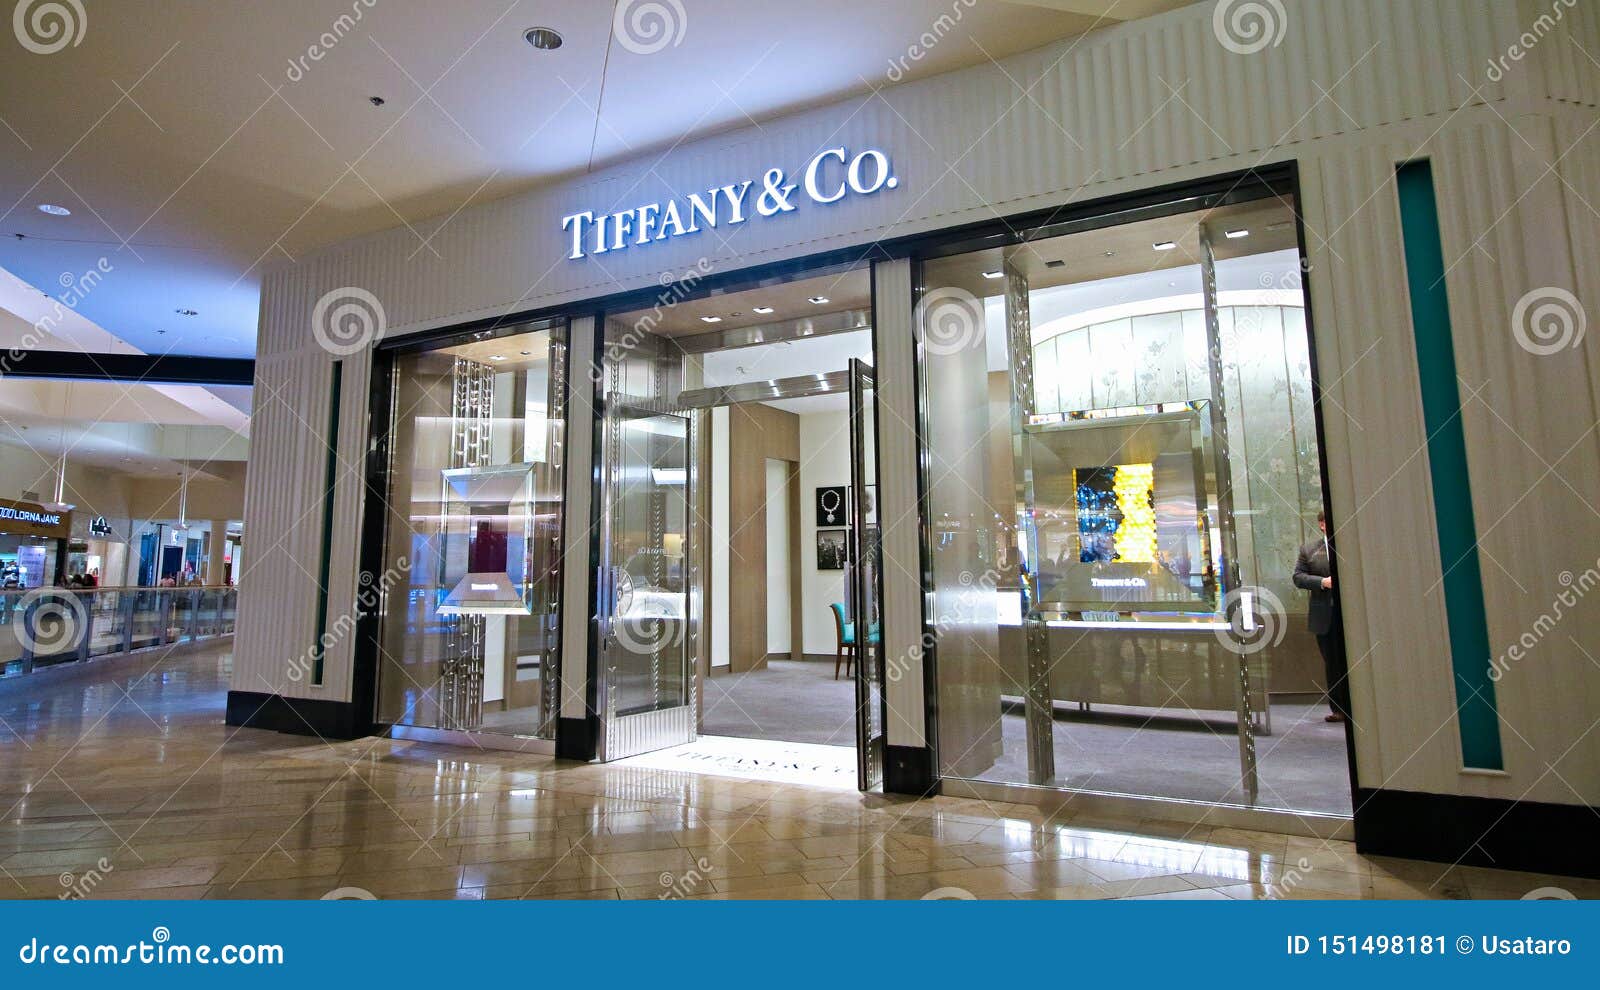 Tiffany \u0026 Co Logo On Store Front Sign 